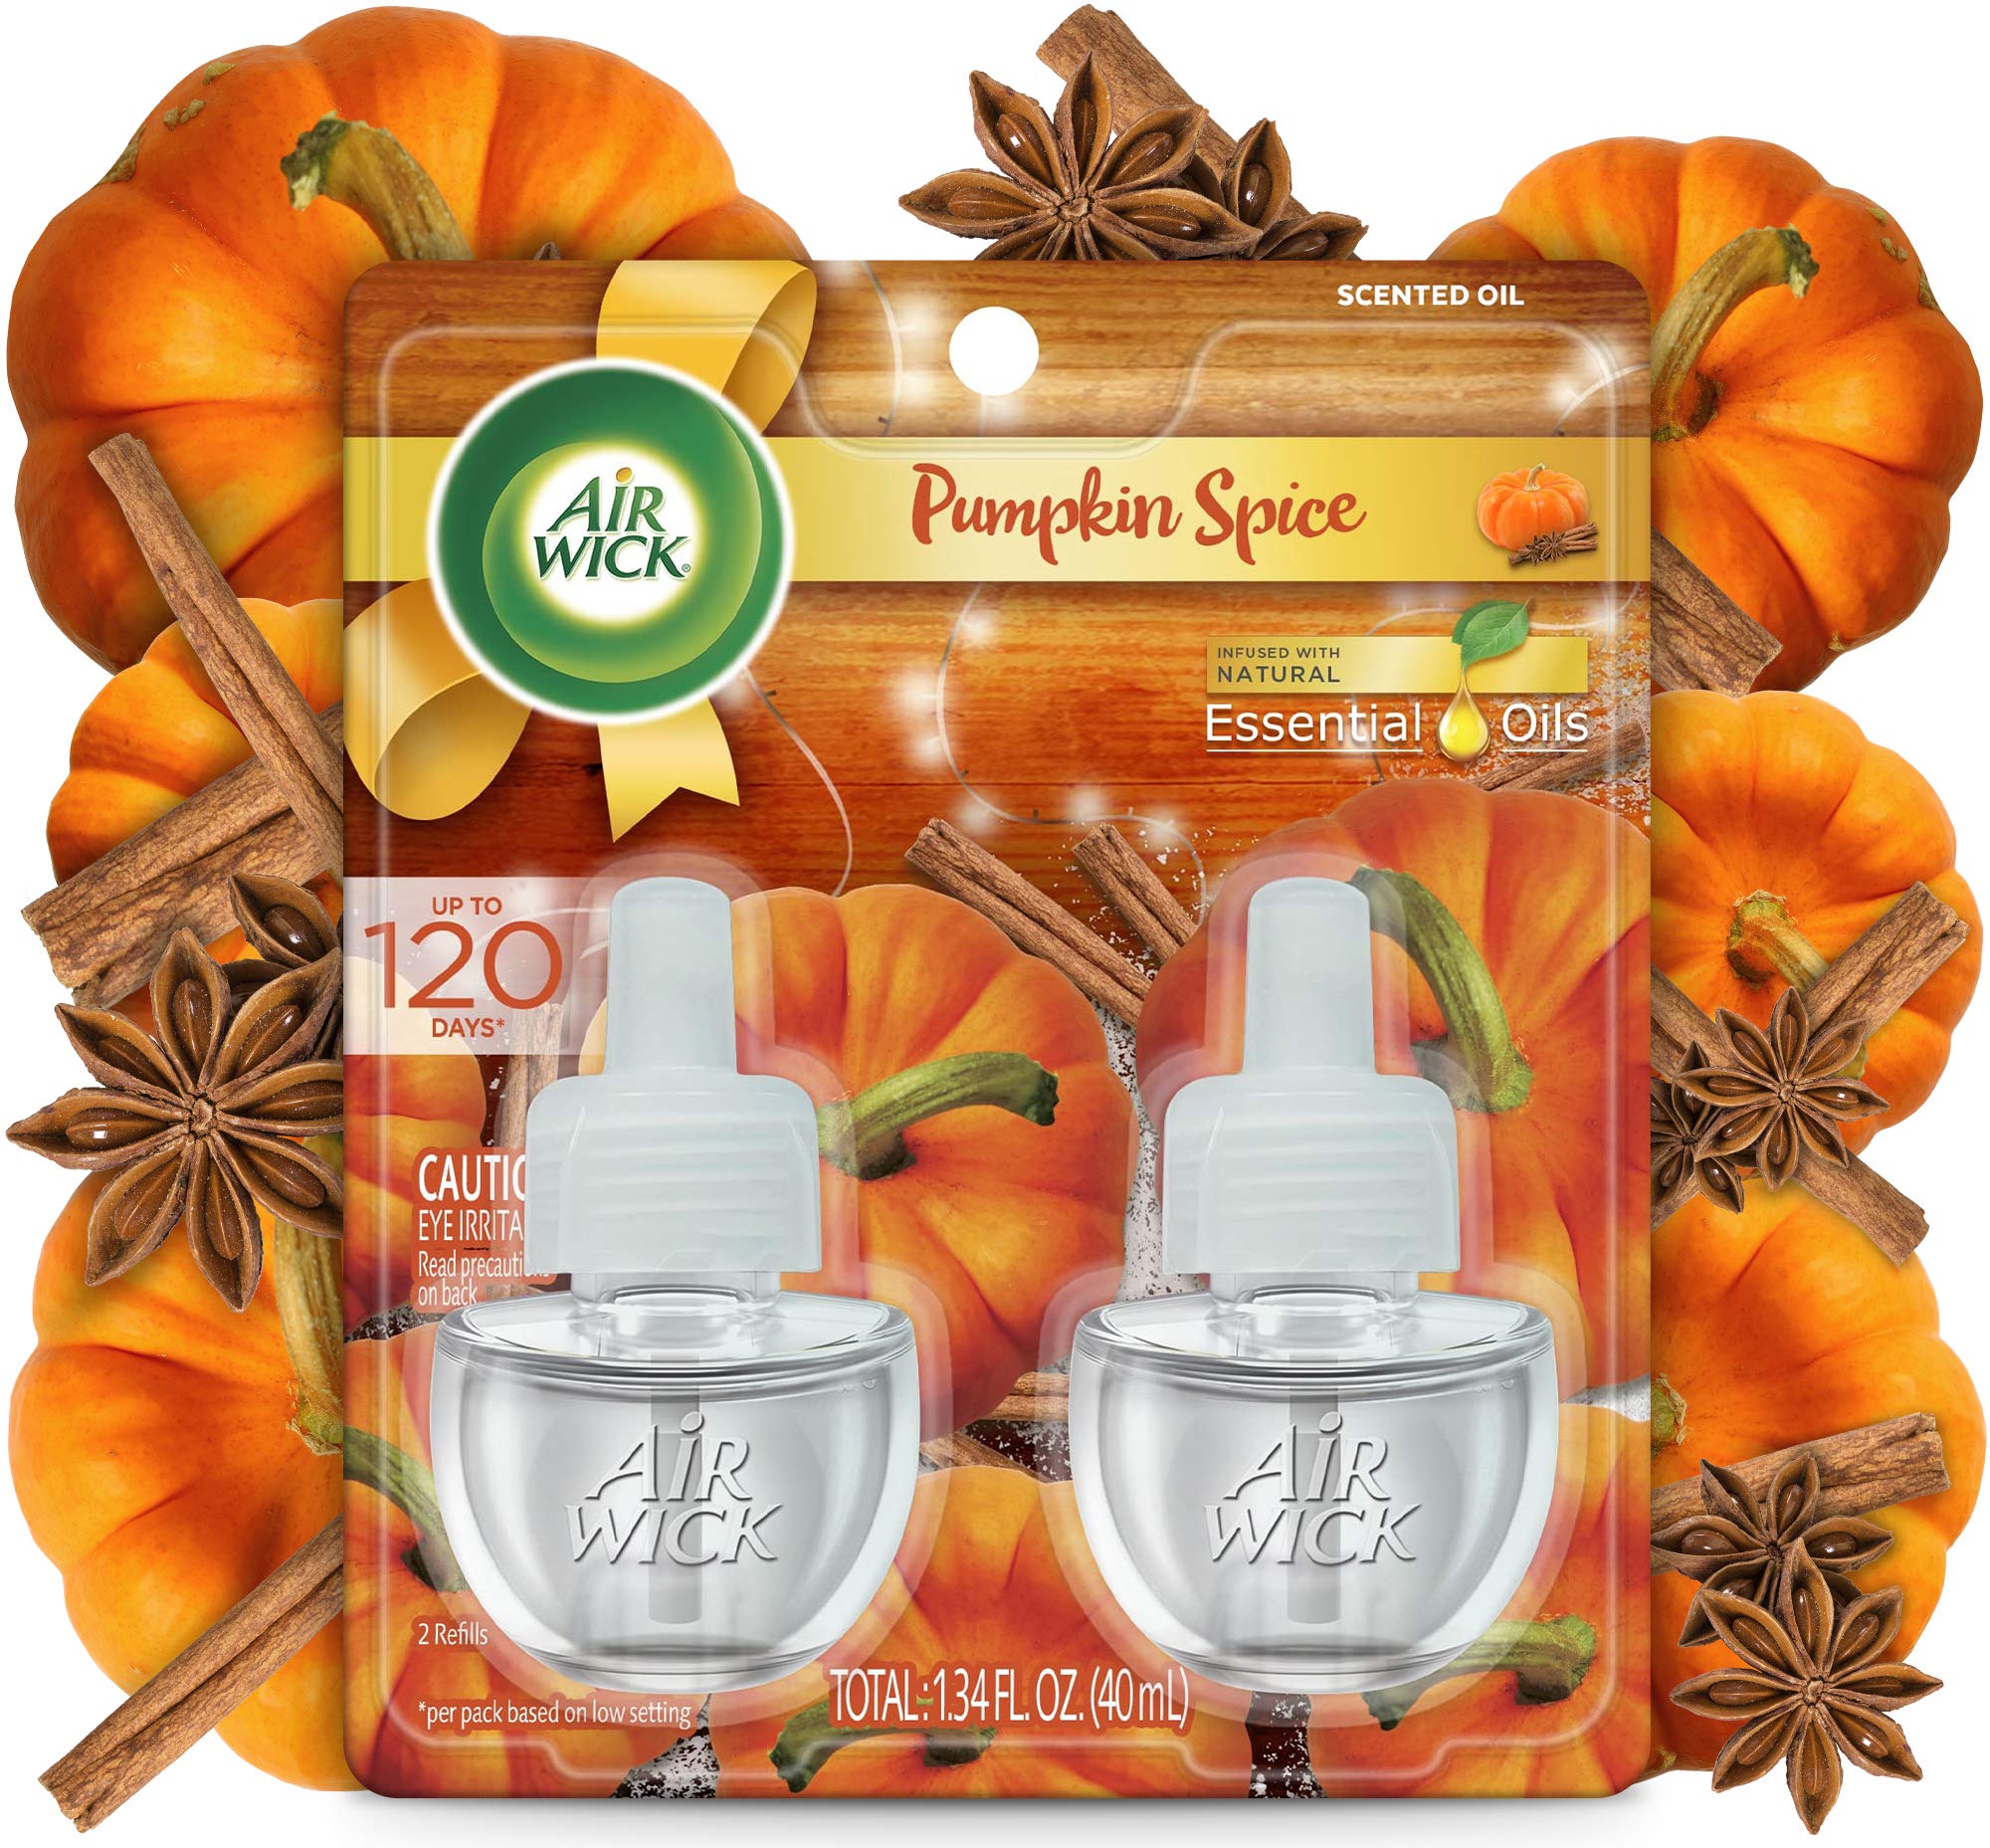 Air Wick Plug in Scented Oil Refill, 2ct, Pumpkin Spice, Air Freshener, Essential Oils, Fall Scent, Fall décor